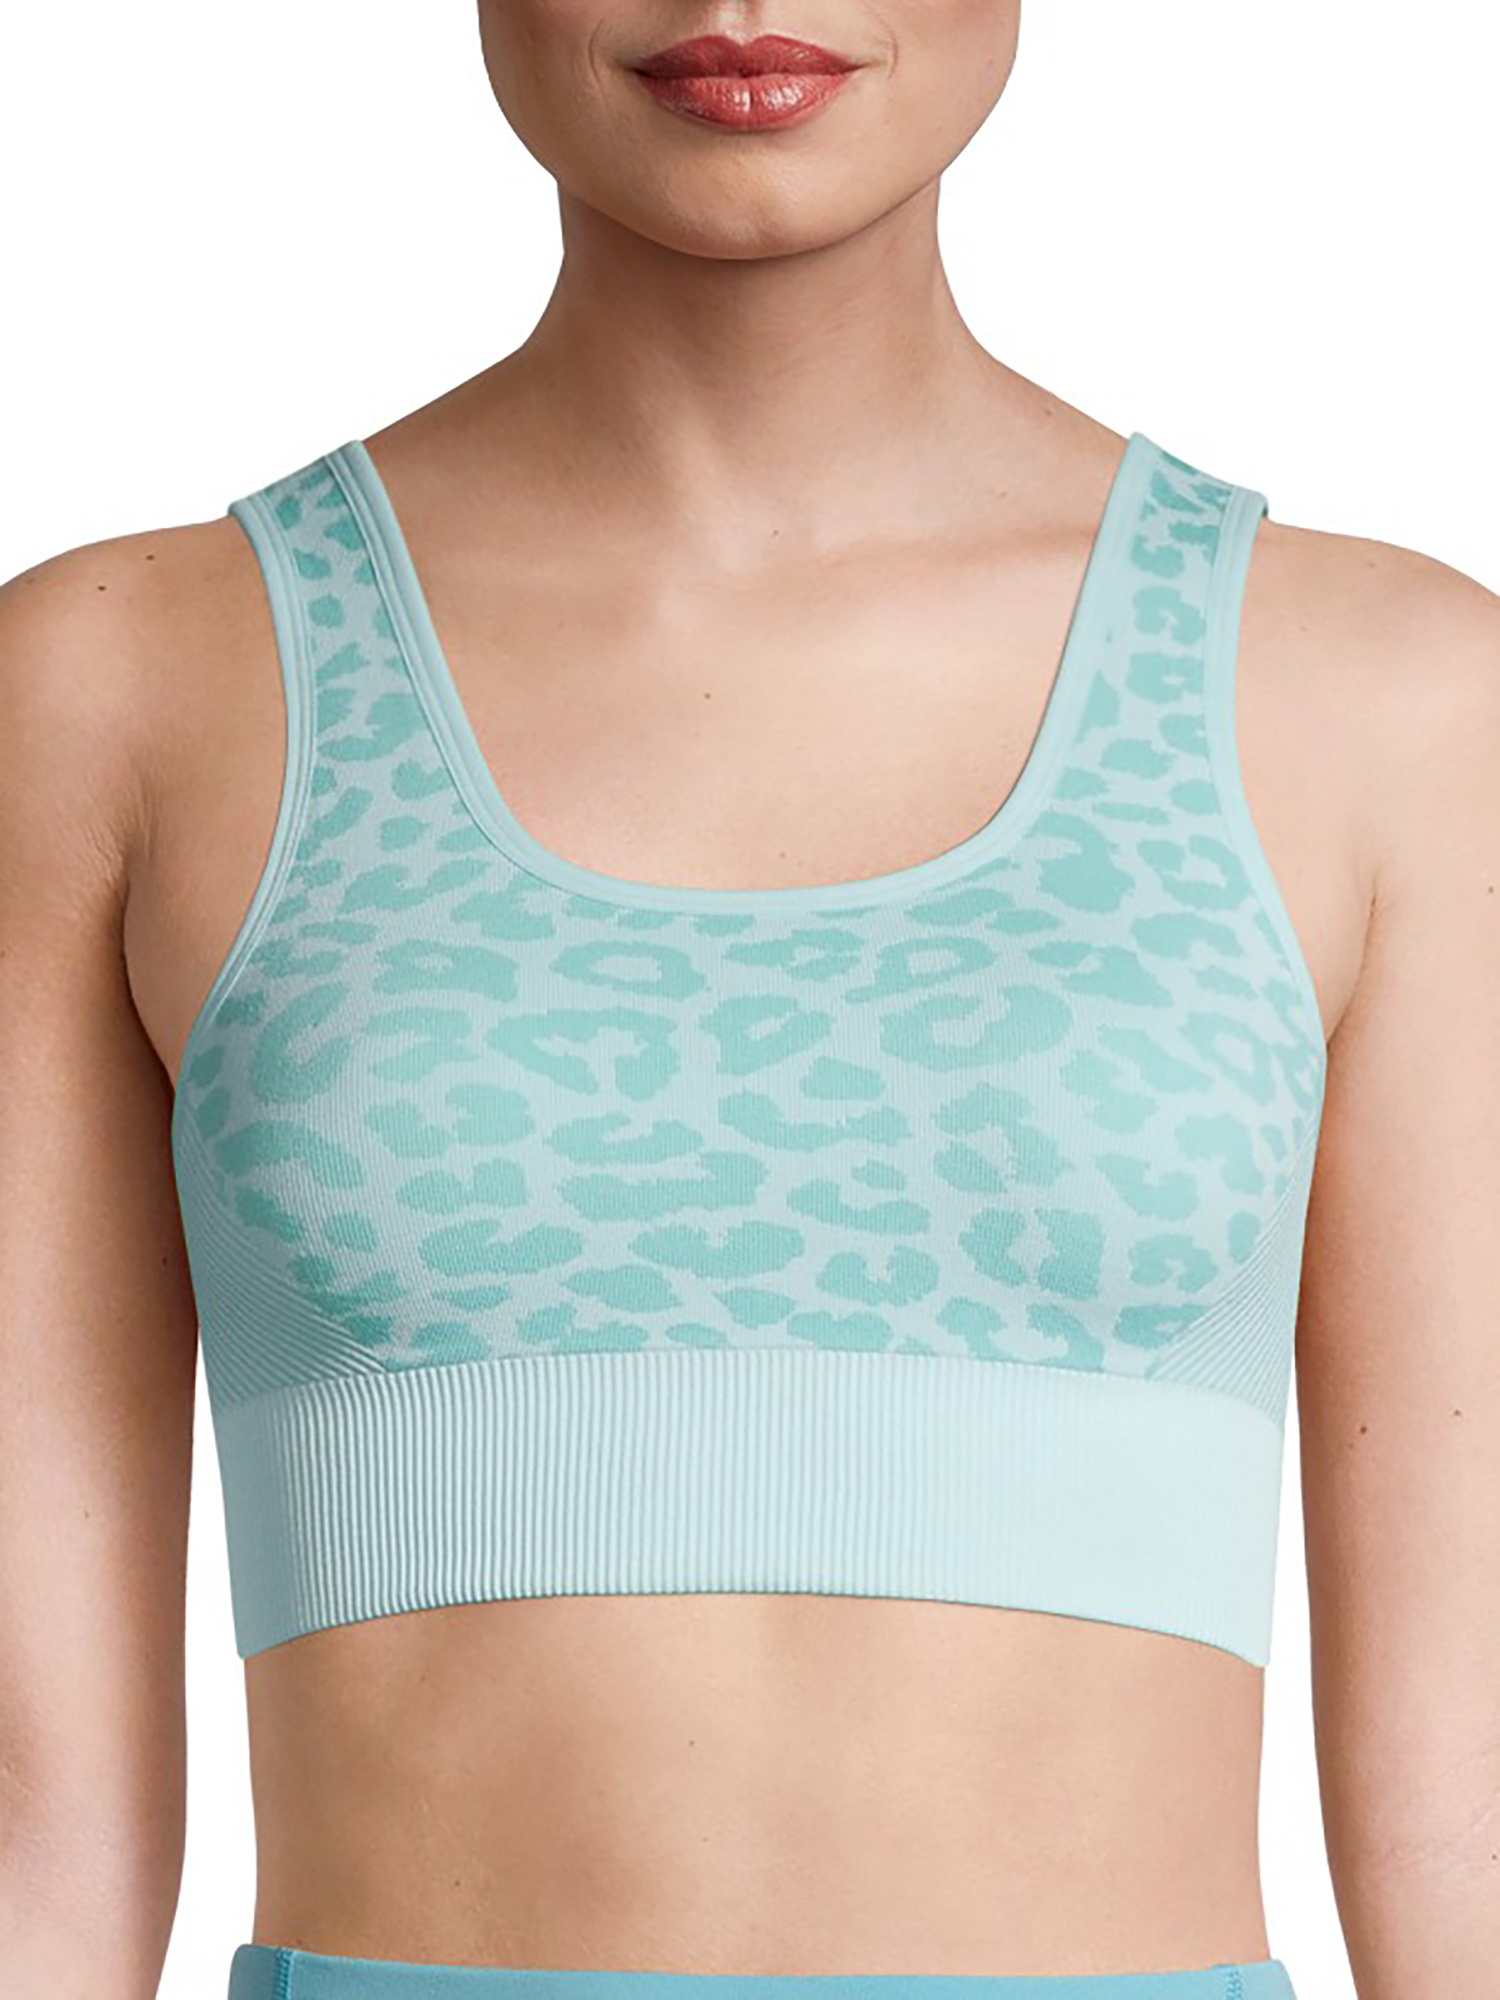 Buy Avia Low Support Trainer Crop Sports Bra at Ubuy UK